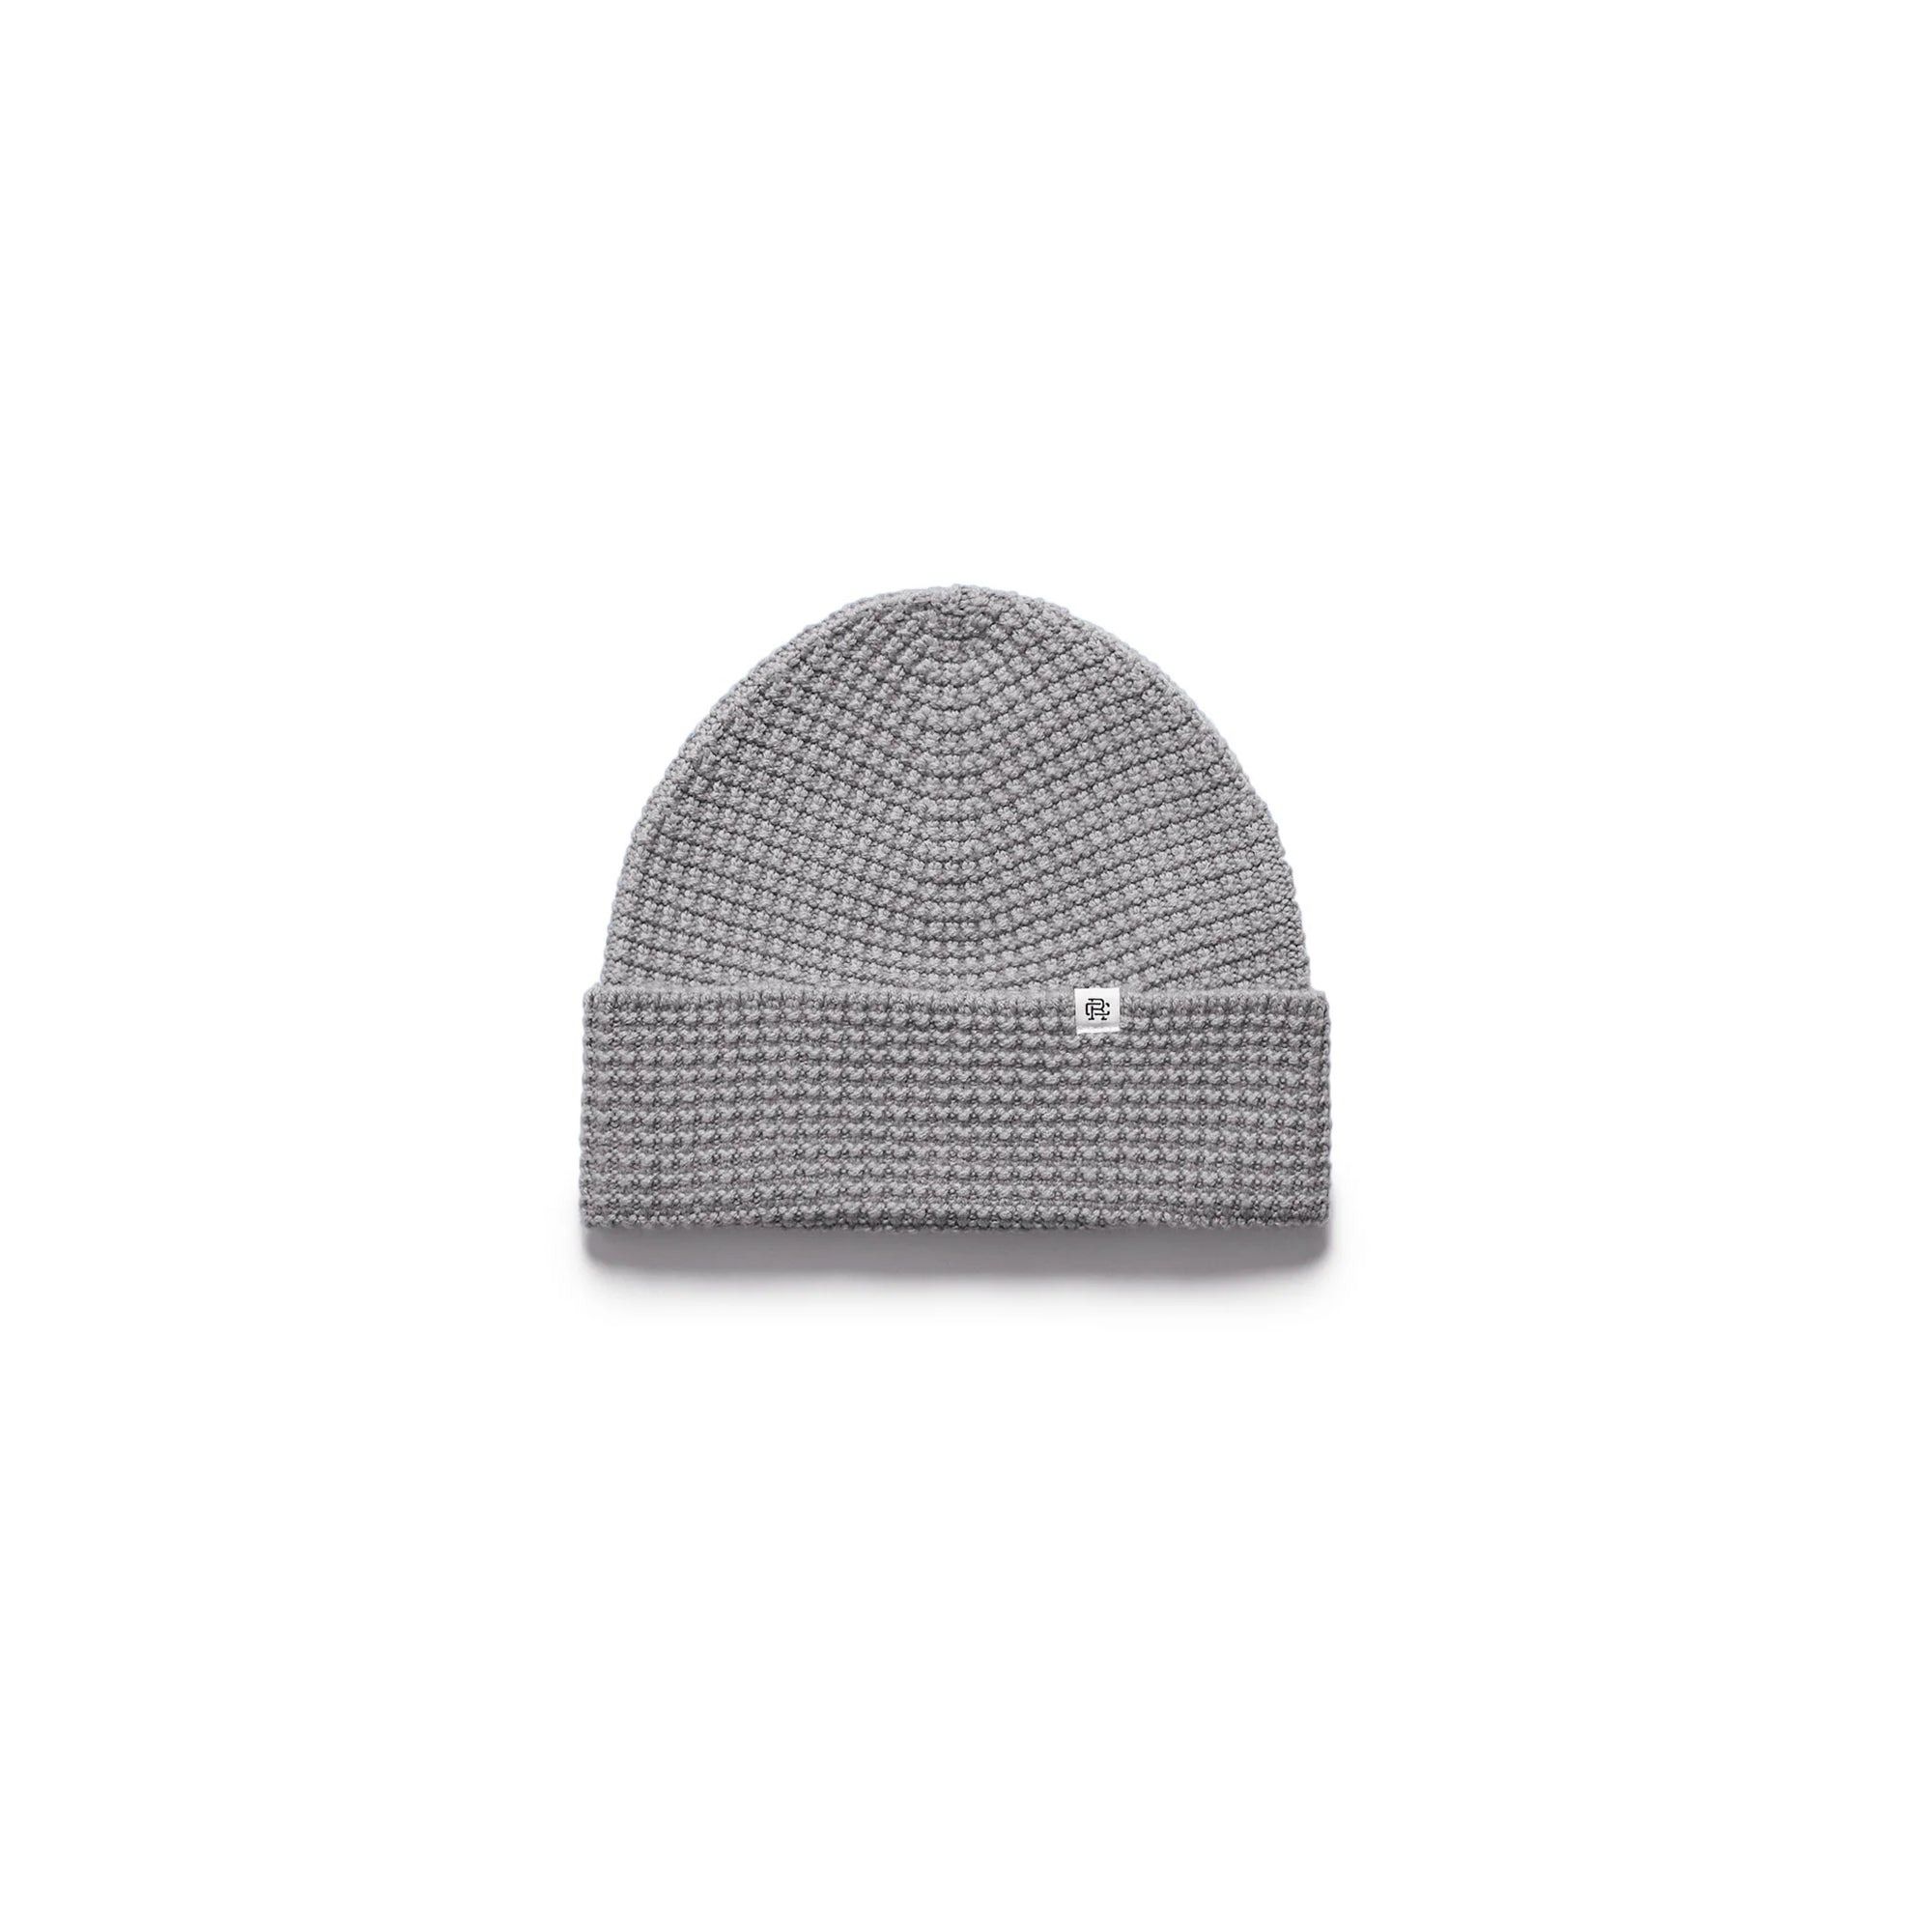 Reigning Champ Waffle Knit Beanie in Grey